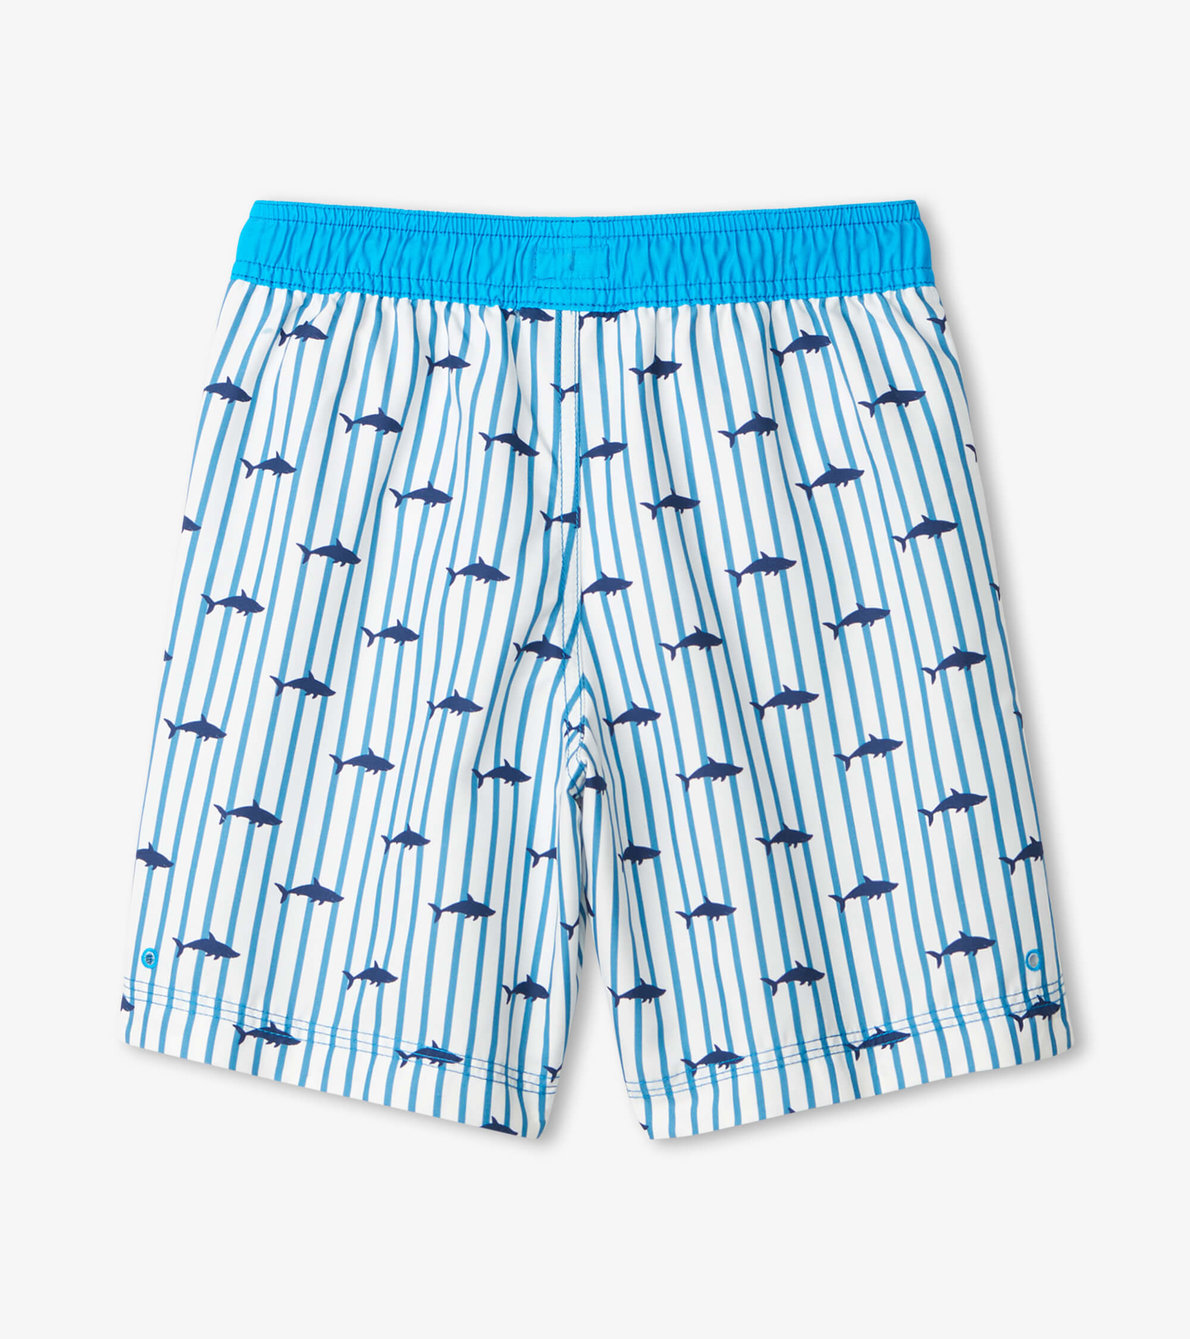 View larger image of Silhouette Sharks Board Shorts